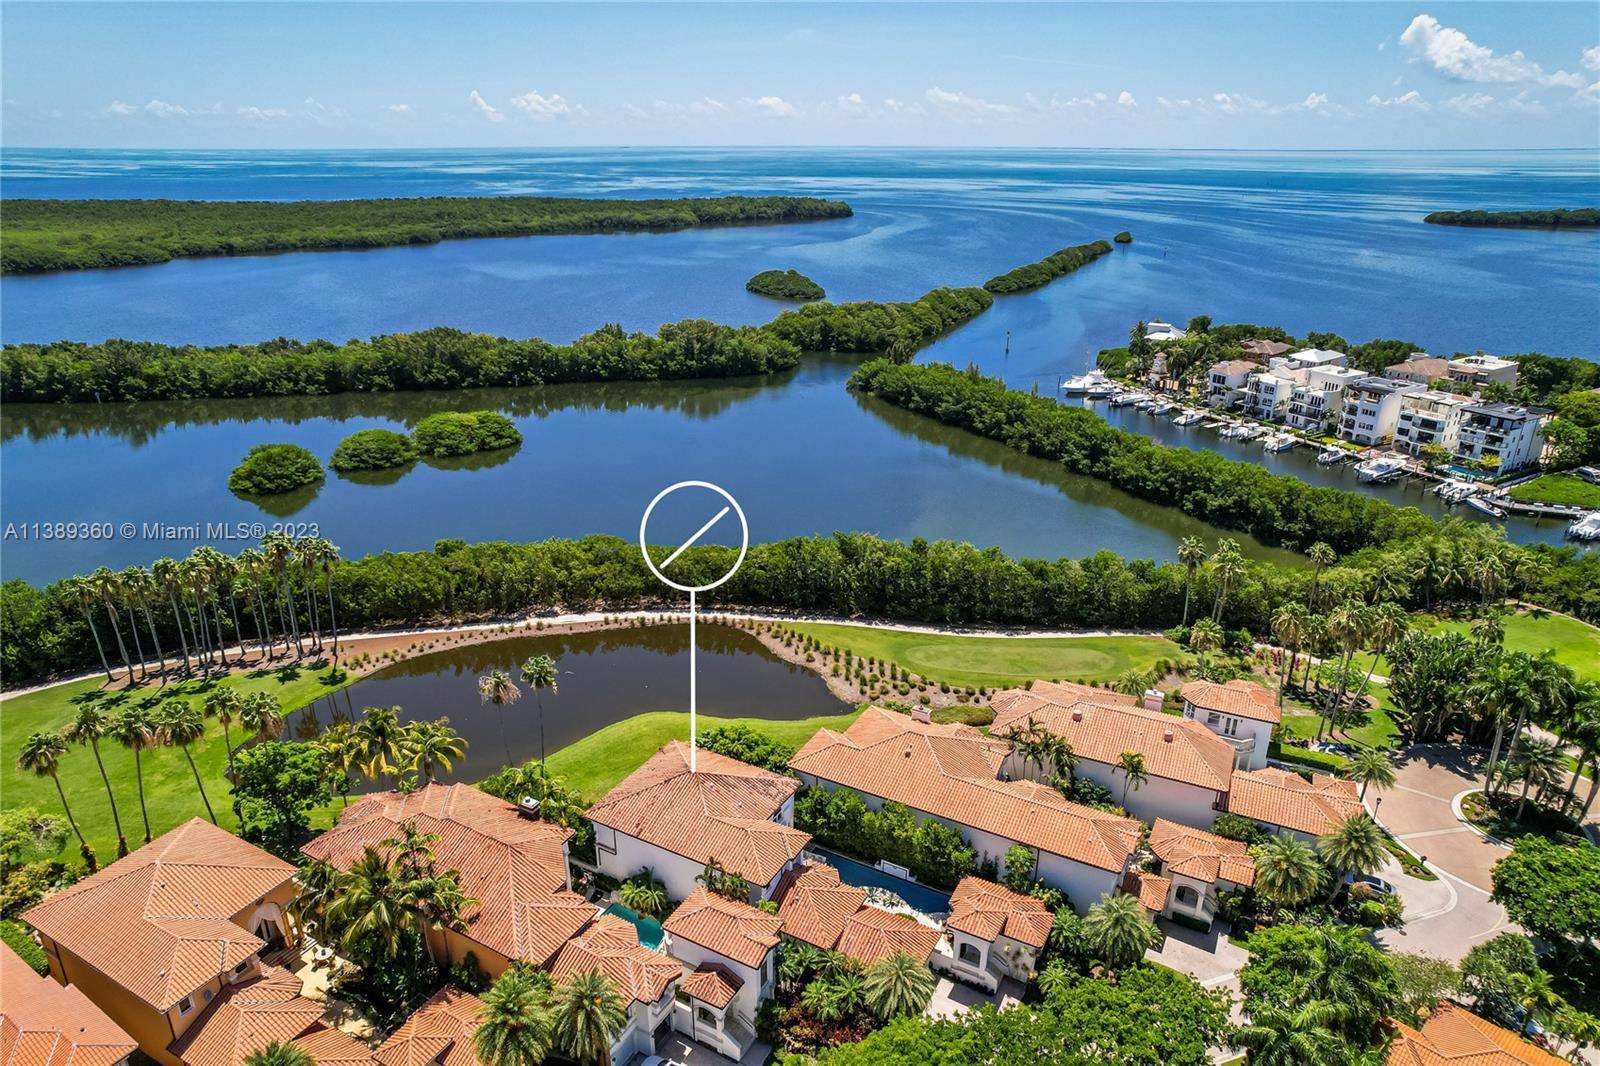 Exquisite 4b 5. 5b estate with a separate guest house overlooks the greens of the Deering Bay Golf Course.